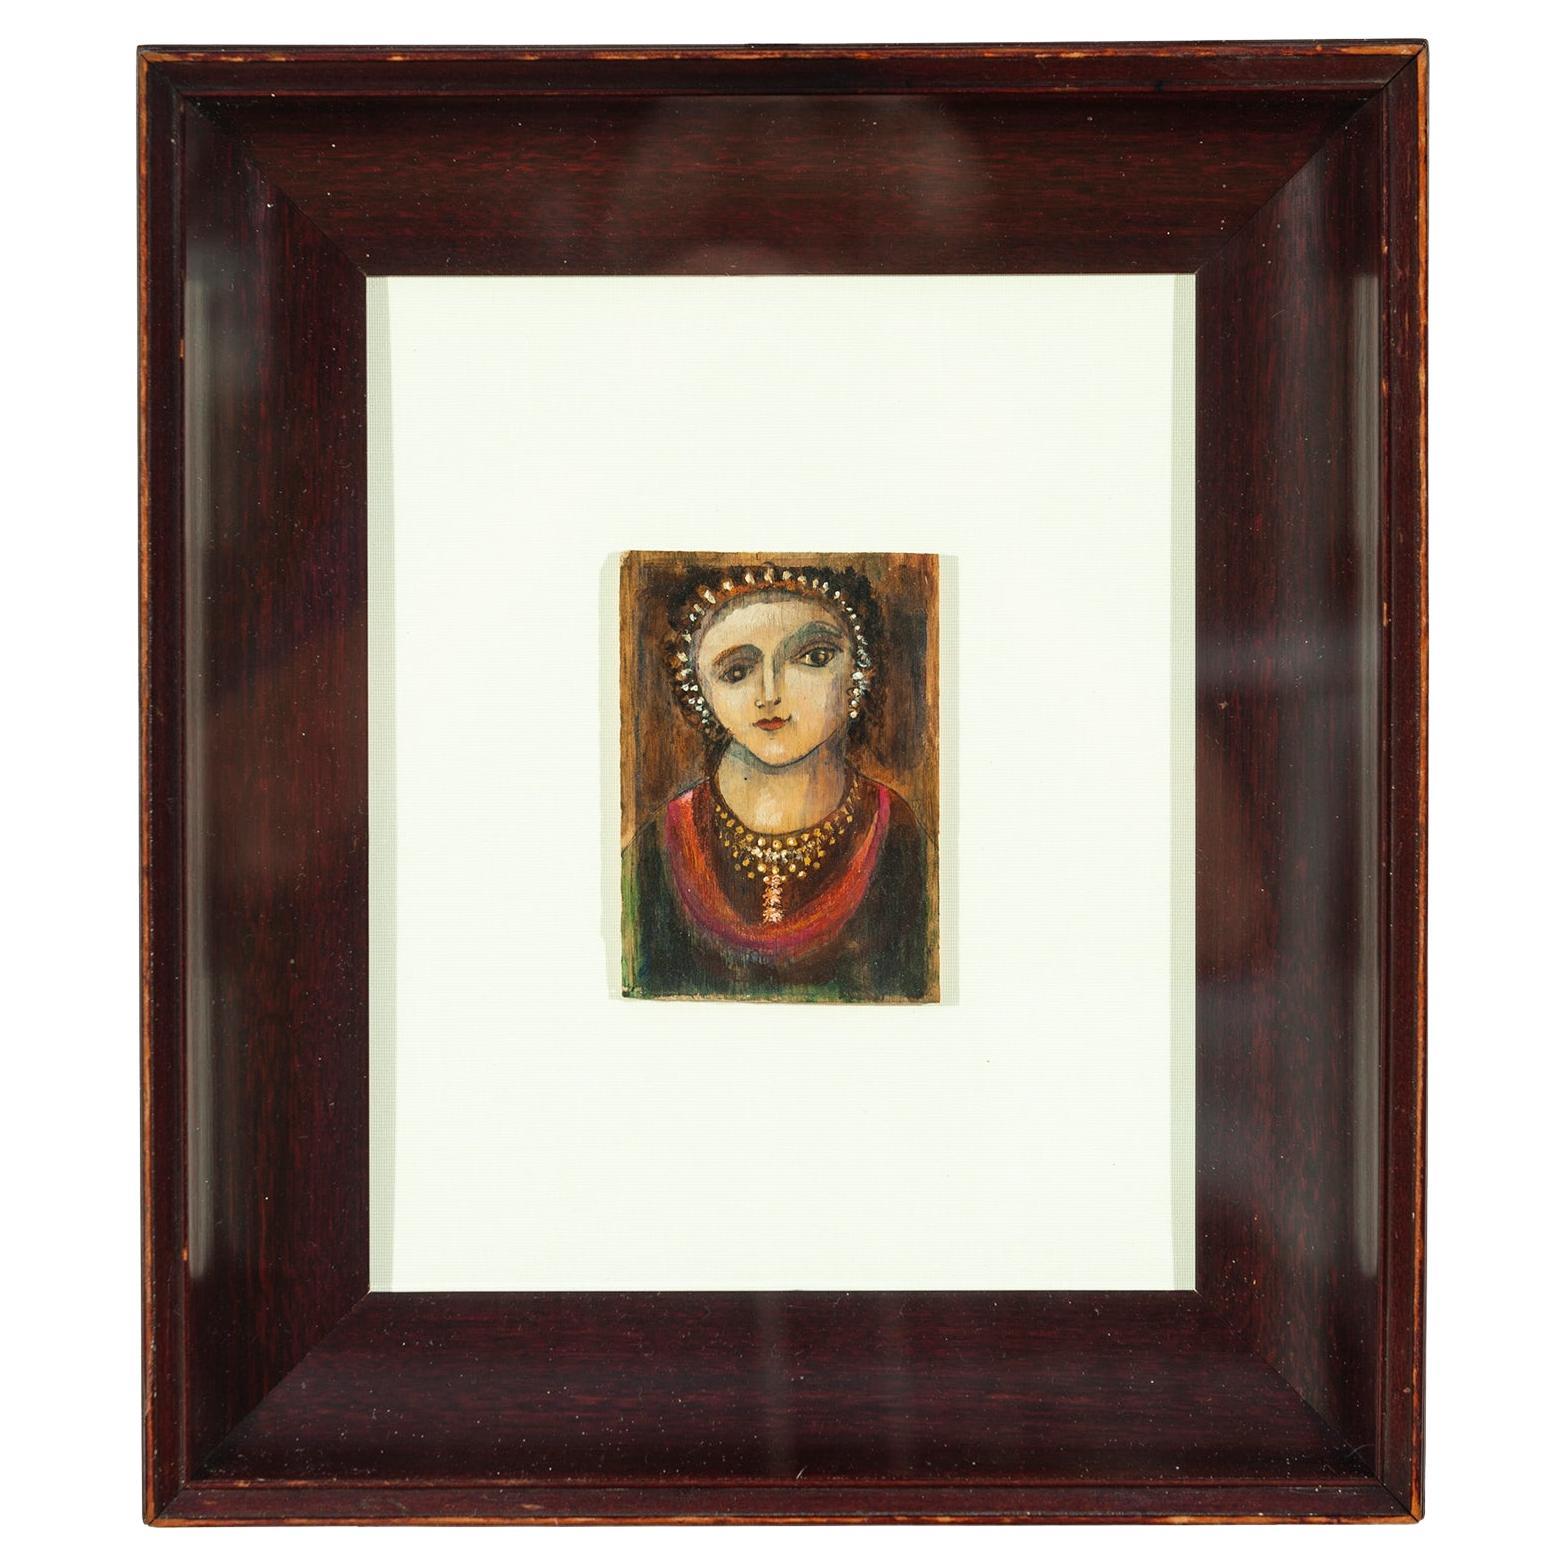 Shadow Box Frame w/Small Image of a Woman For Sale